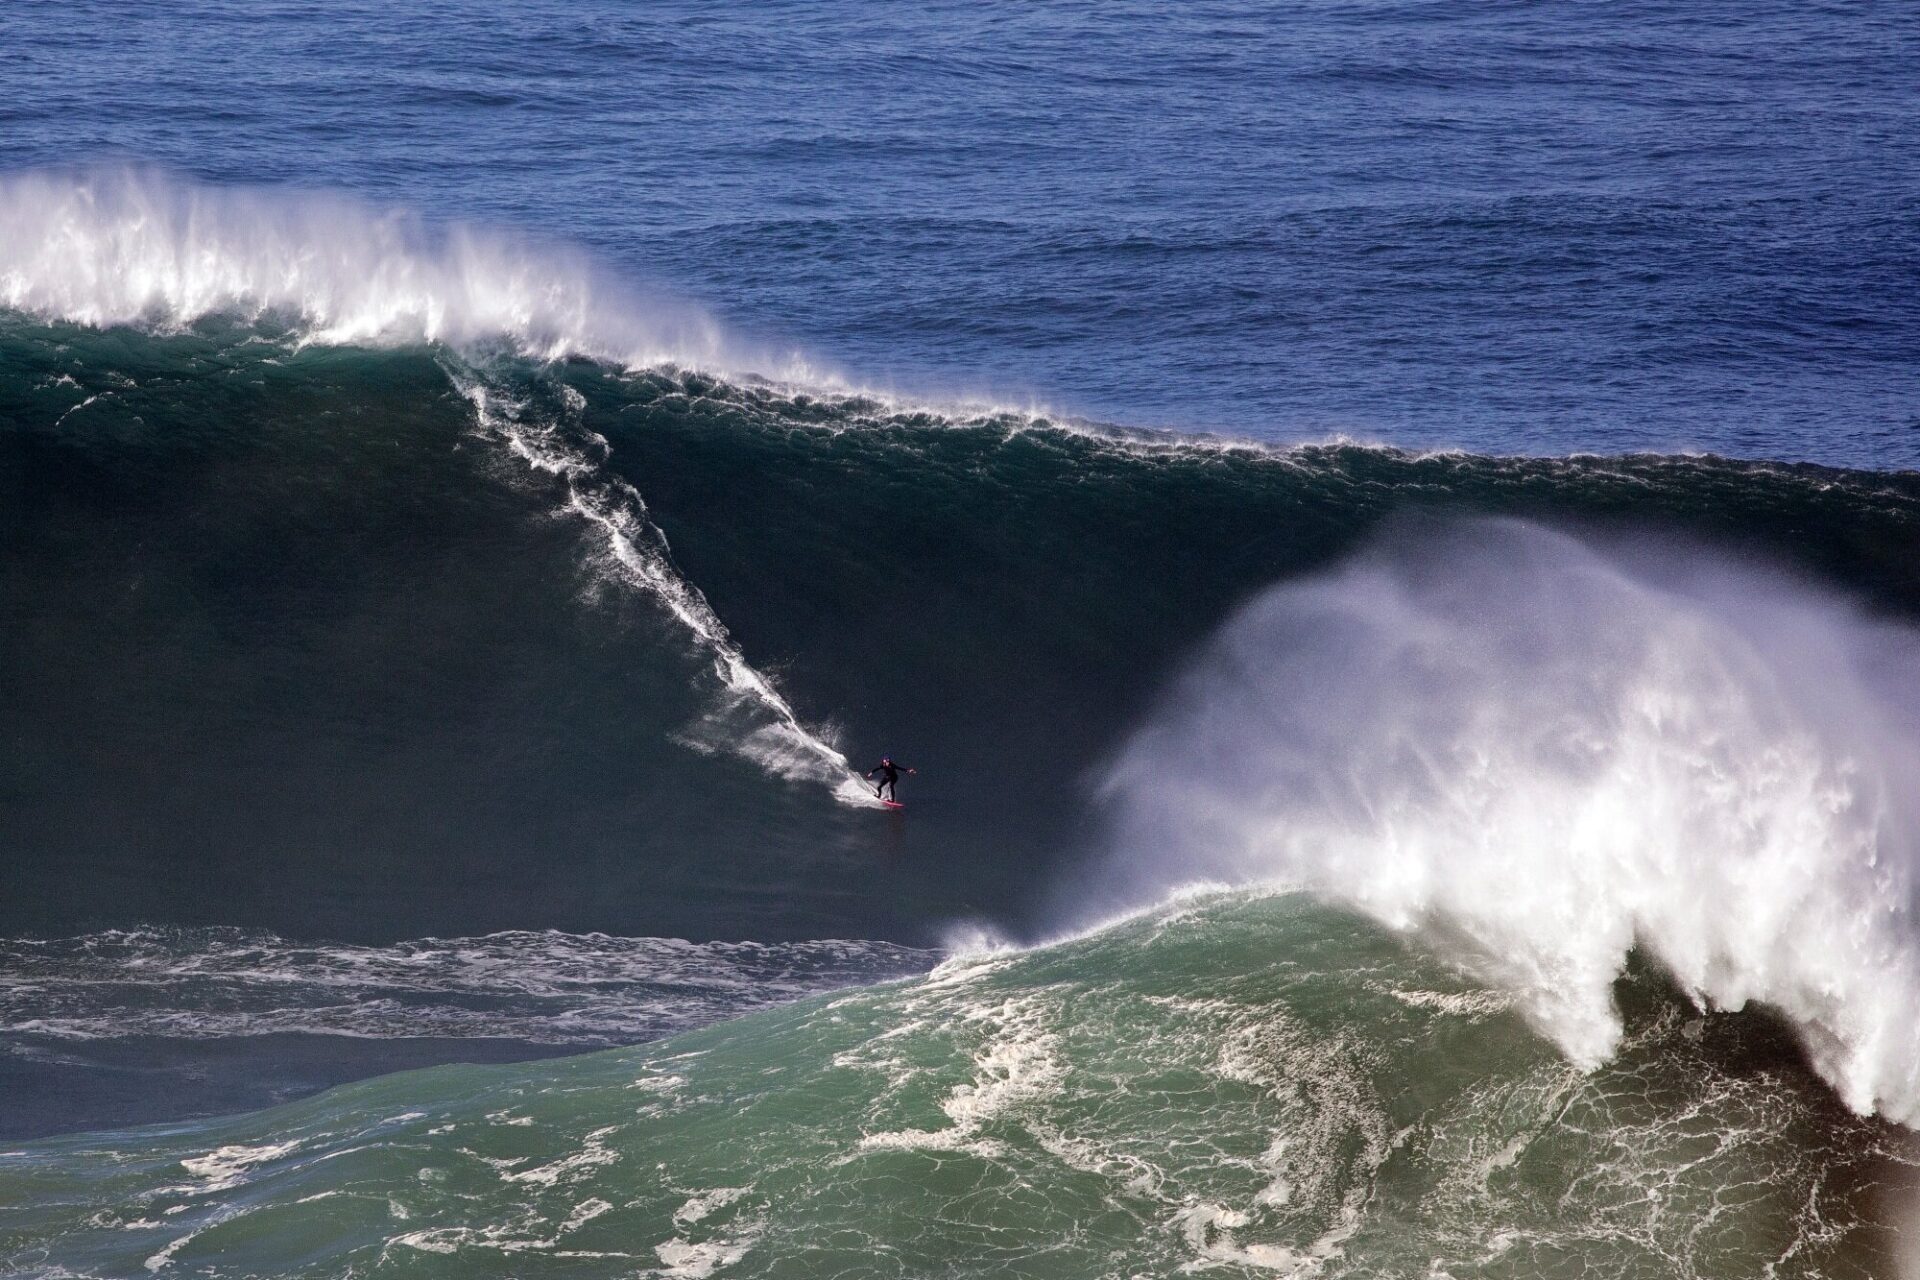 Justine charging during the first winter swell at Praia do Norte, Portugal, in October 2020. © Hugo Silva / Red Bull